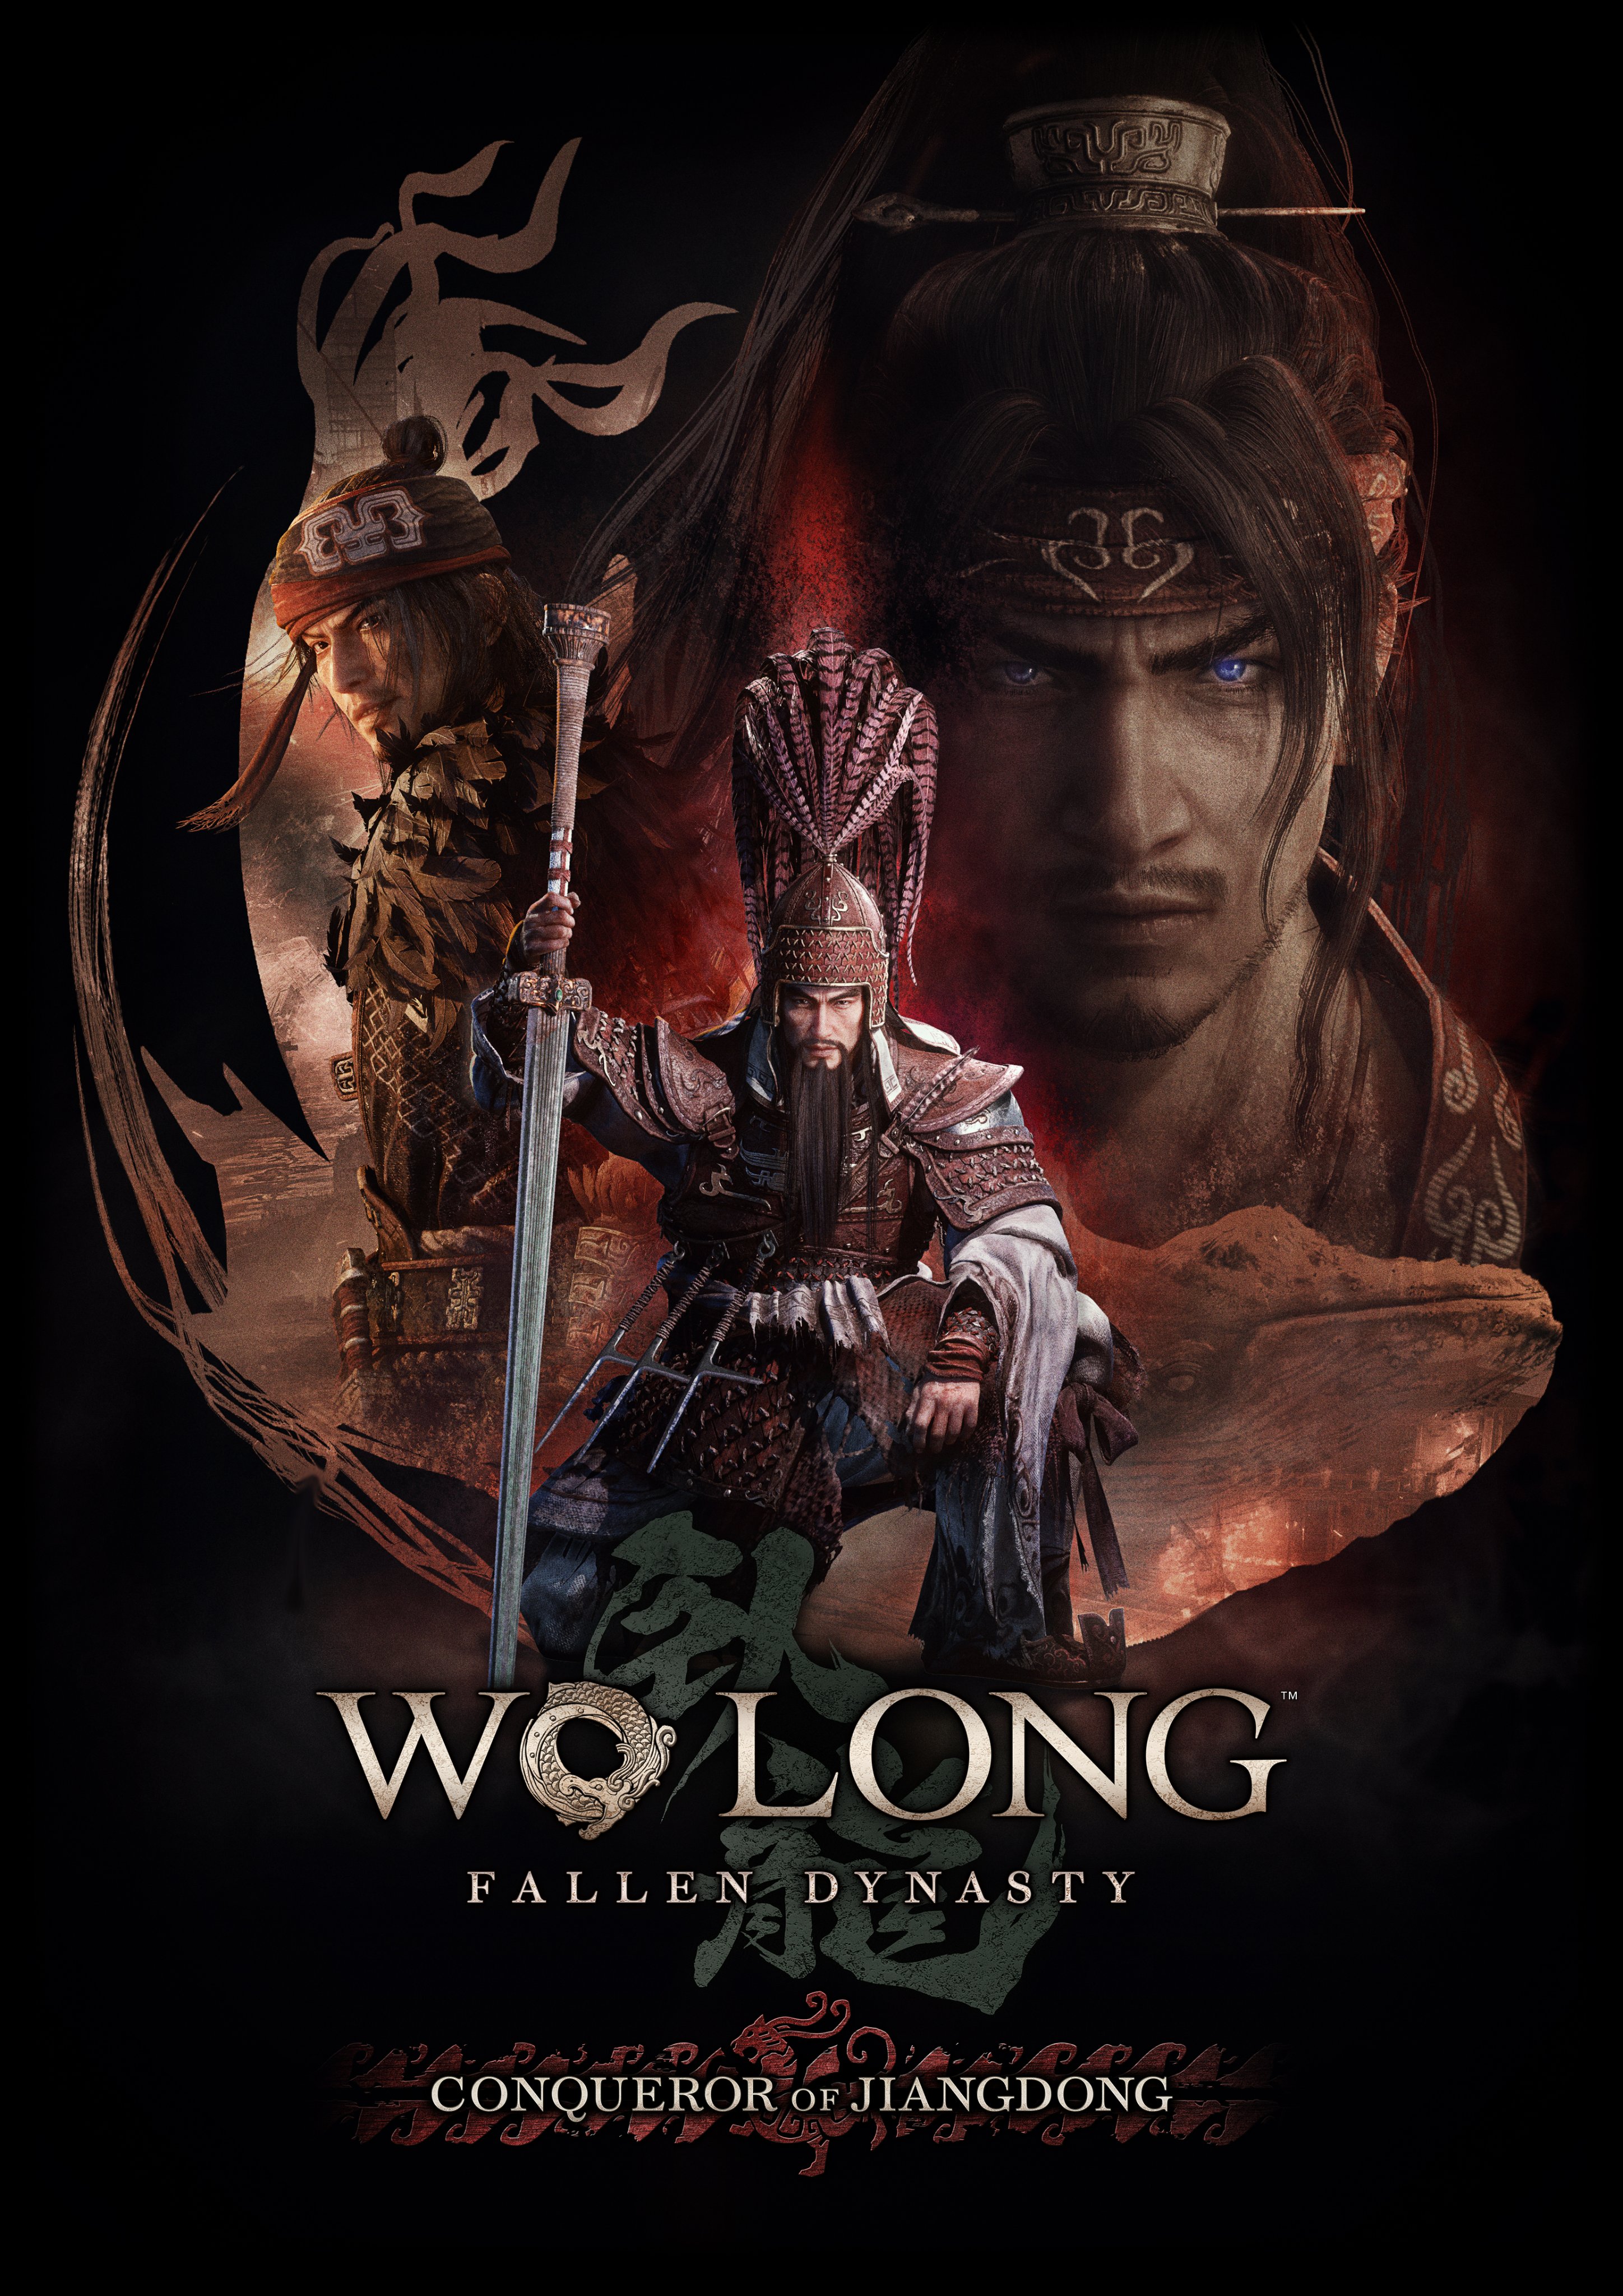 What Are the PC Requirements for Wo Long: Fallen Dynasty?